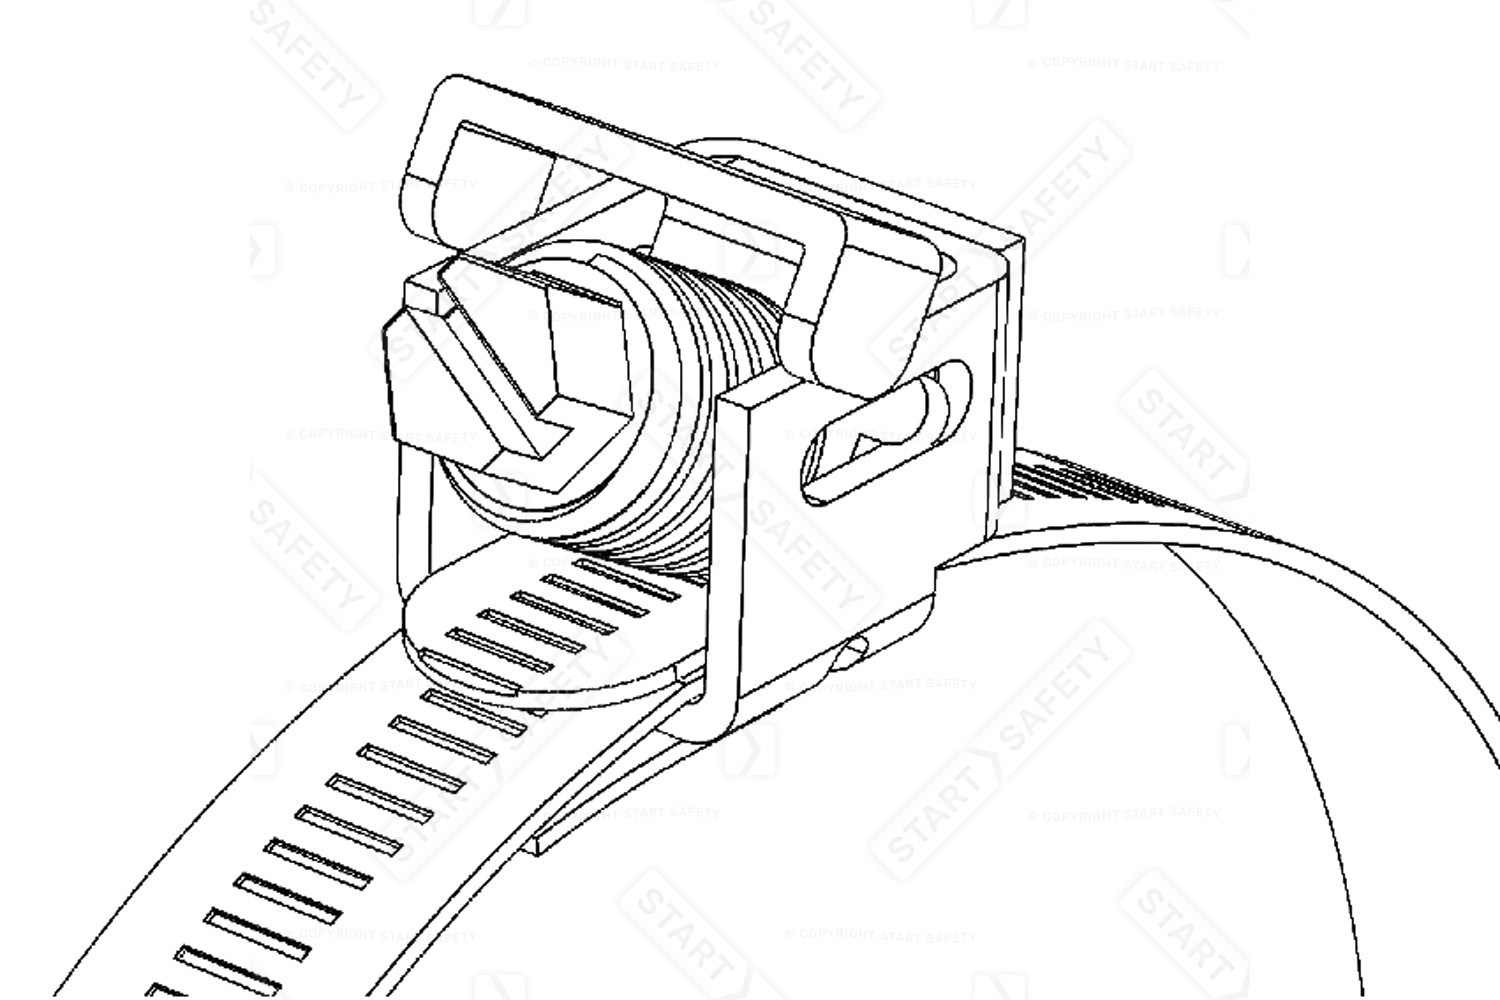 jubilee quick-release hose clamp drawing